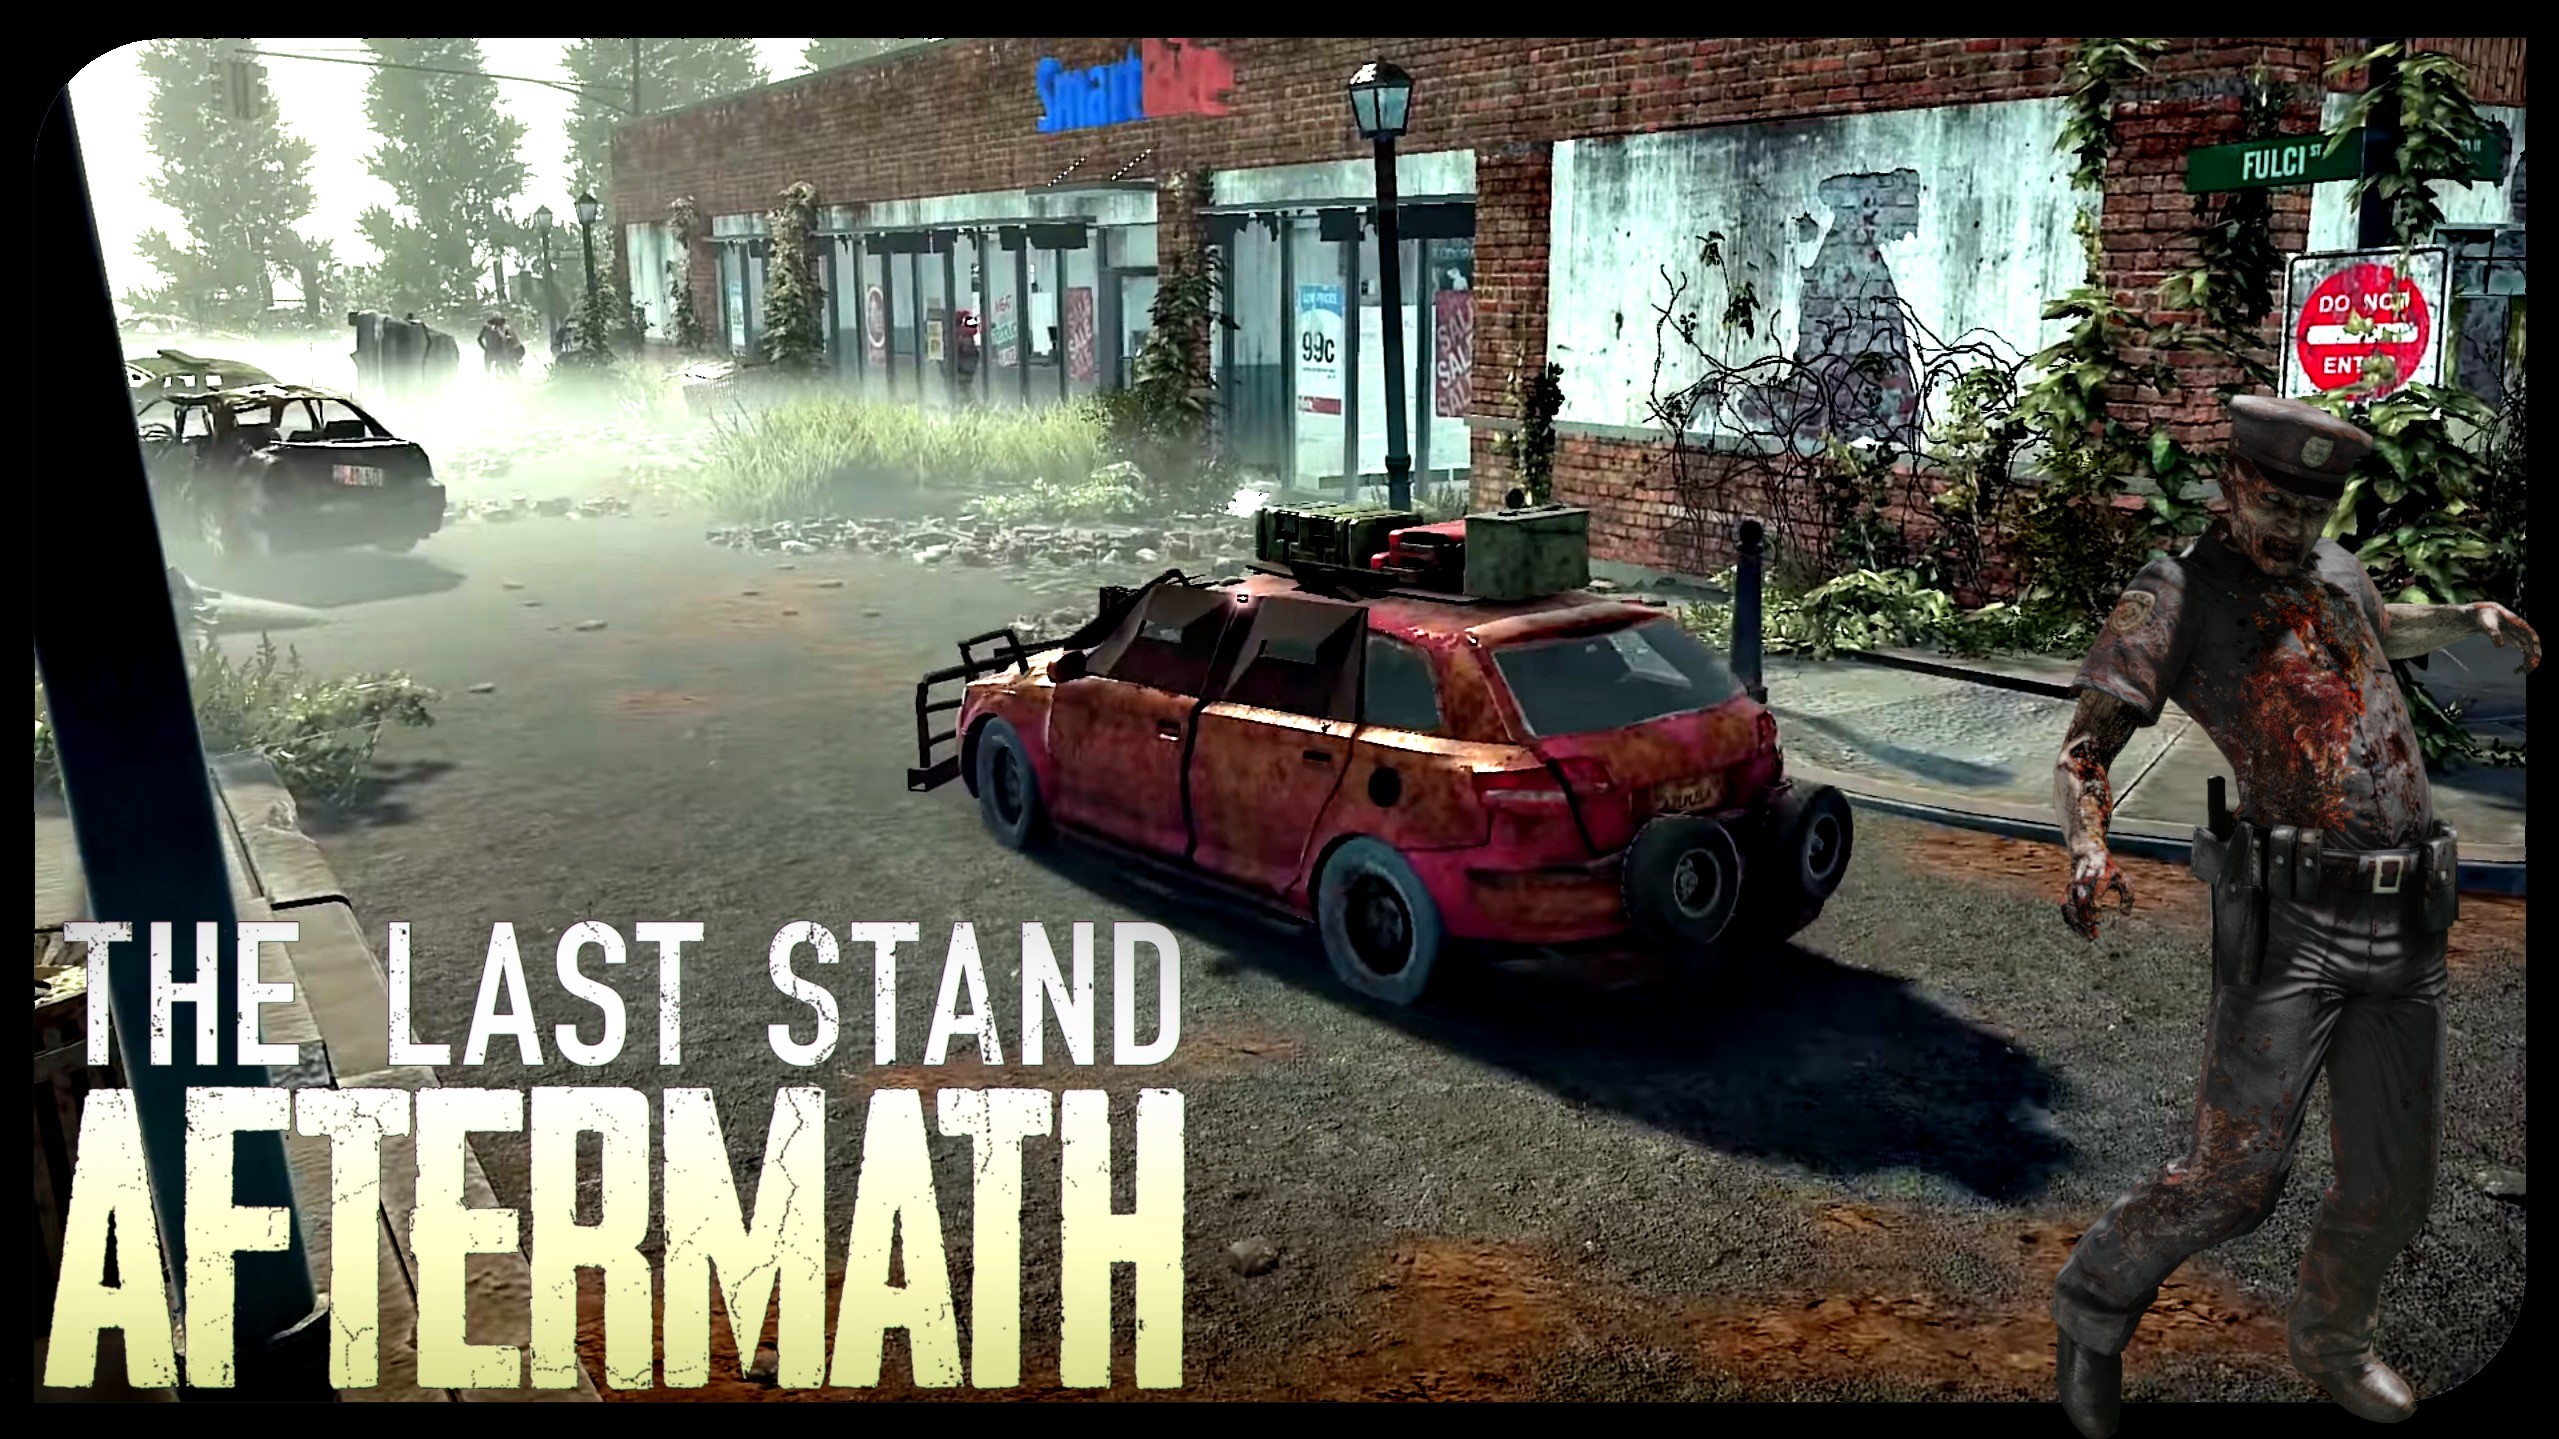 Gojo last stand. The last Stand: Aftermath. The-last-Stand-Aftermath-v1.1.0.462.